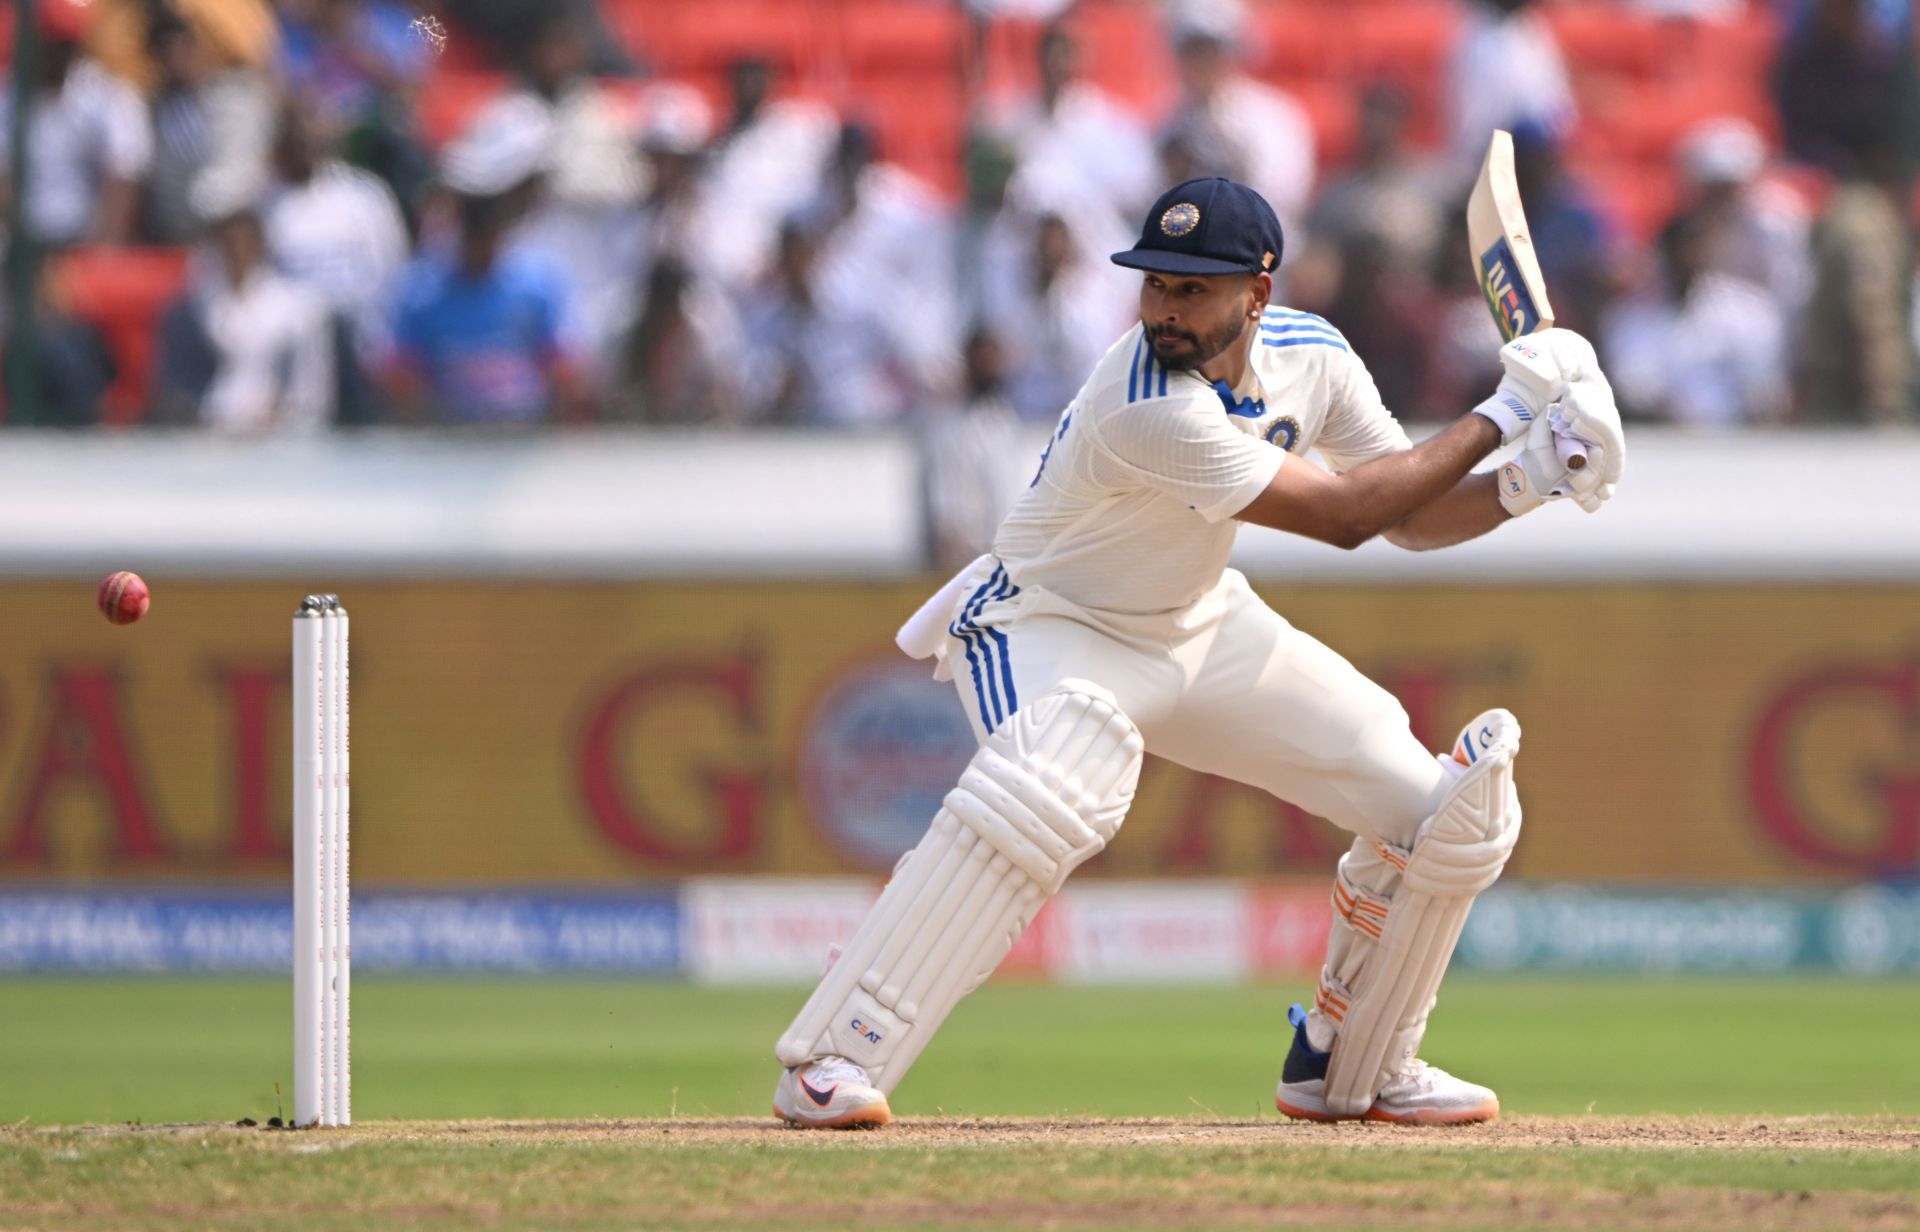 Shreyas Iyer is going through a lean patch in Test cricket. (Pic: Getty Images)